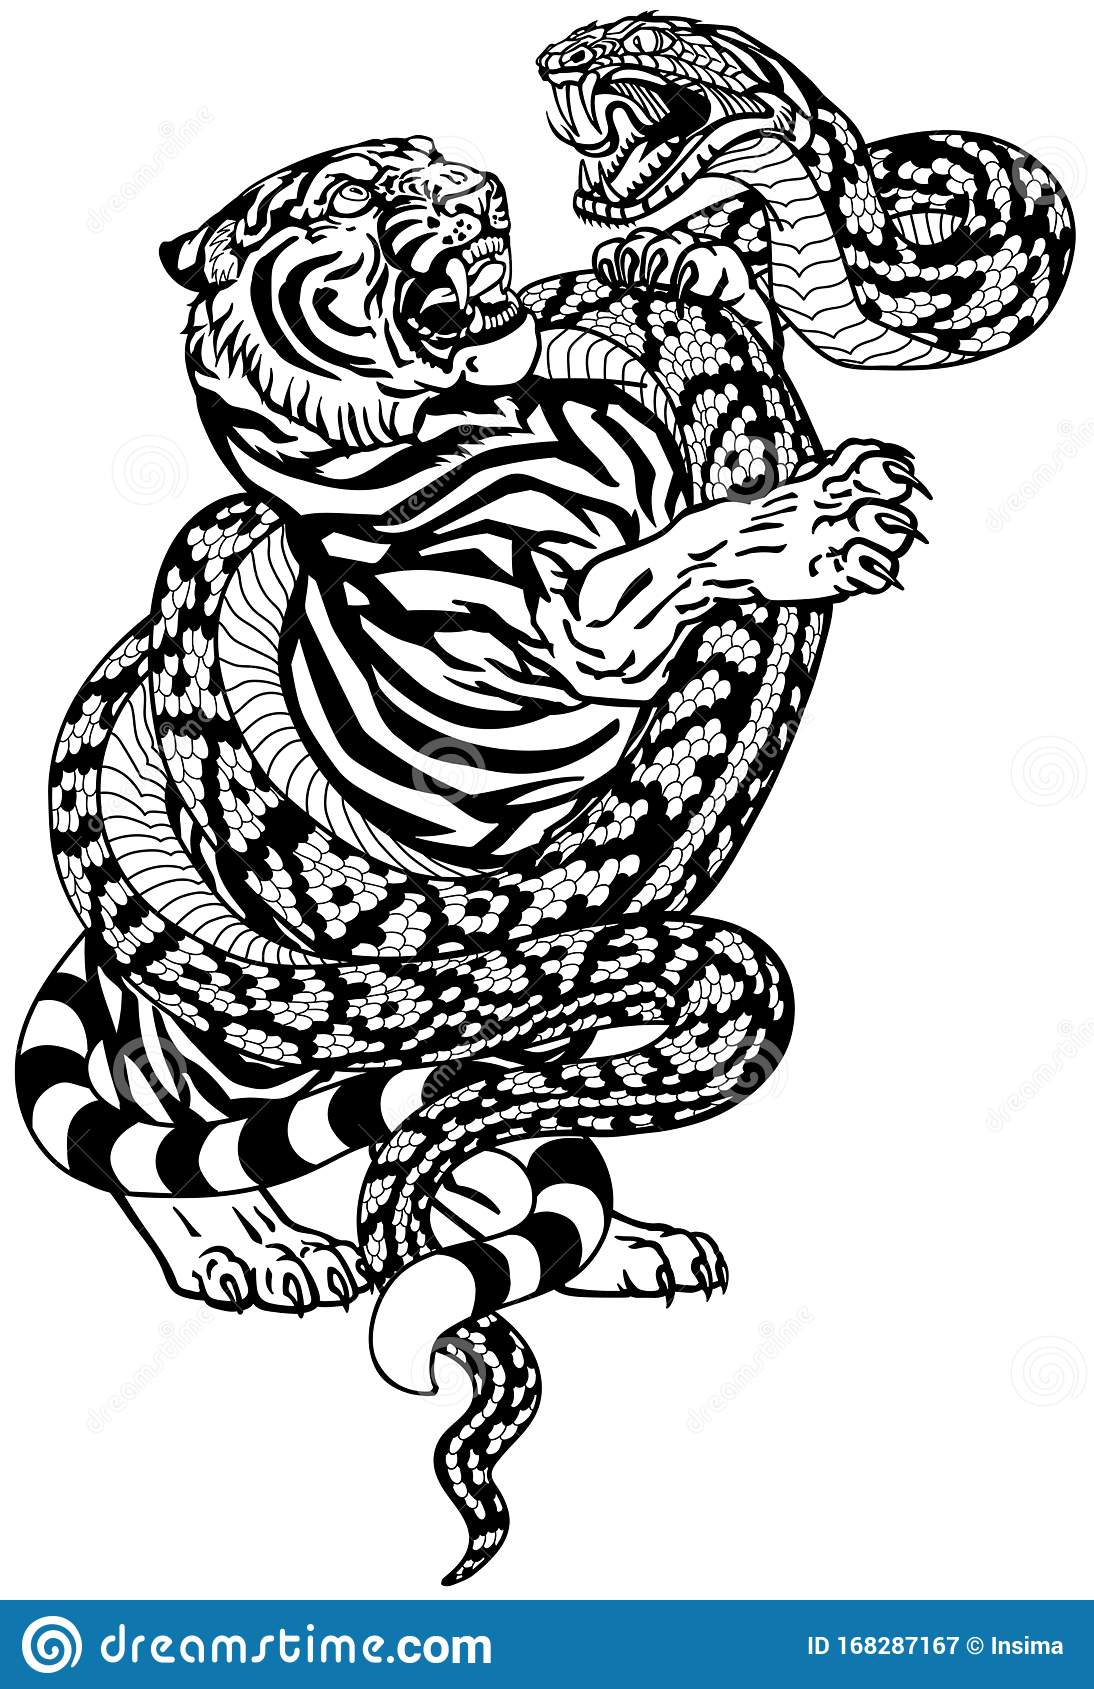 tiger-versus-snake-black-white-tattoo-fight-tiger-snake-angry-reptile-coiled-big-cat-graphic-s...jpg